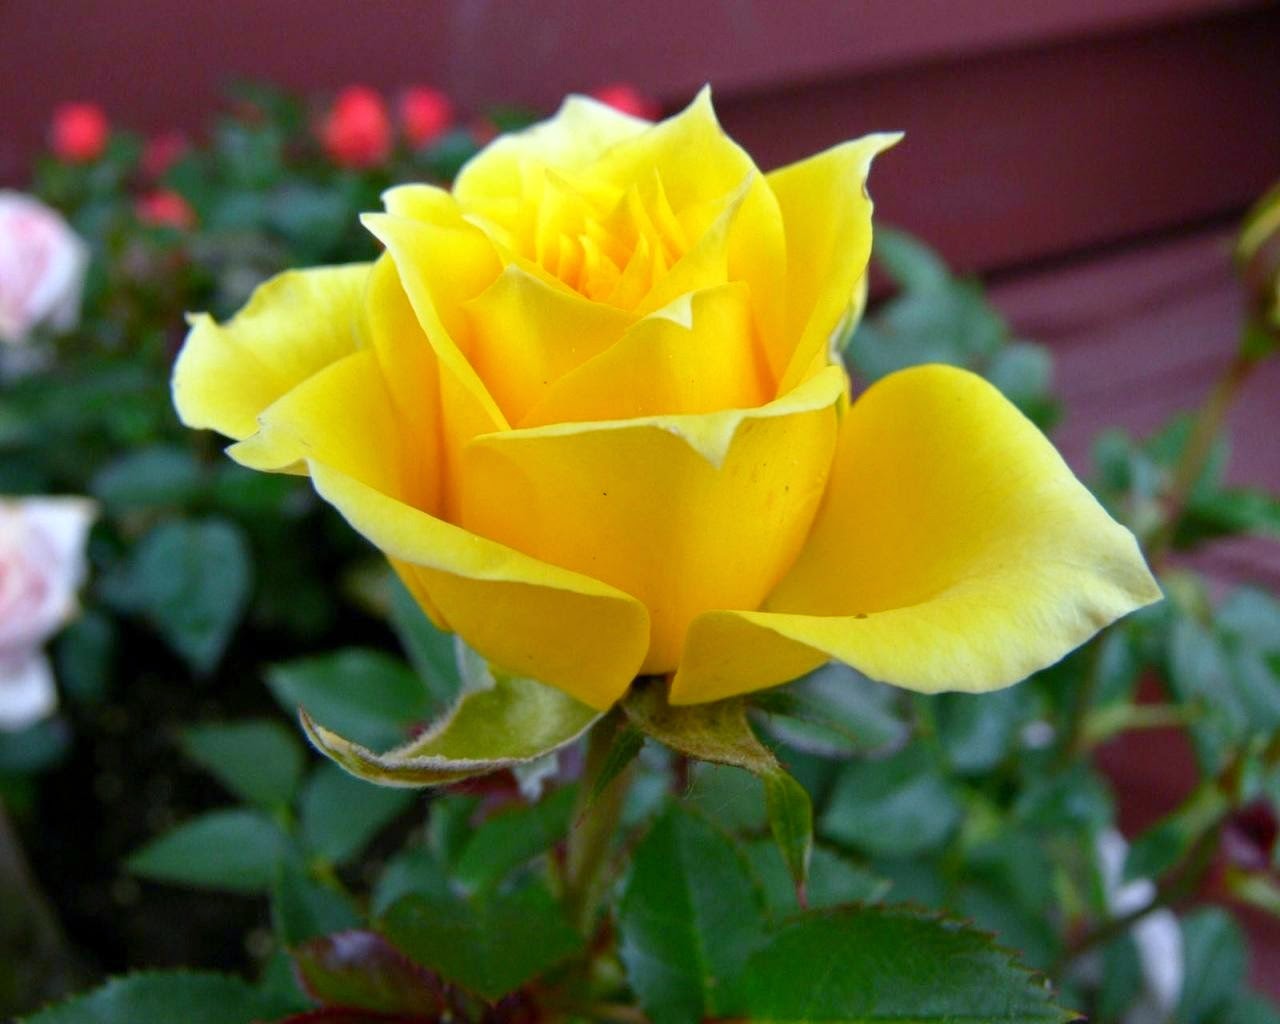 beautiful yellow rose flower blooming in the garden